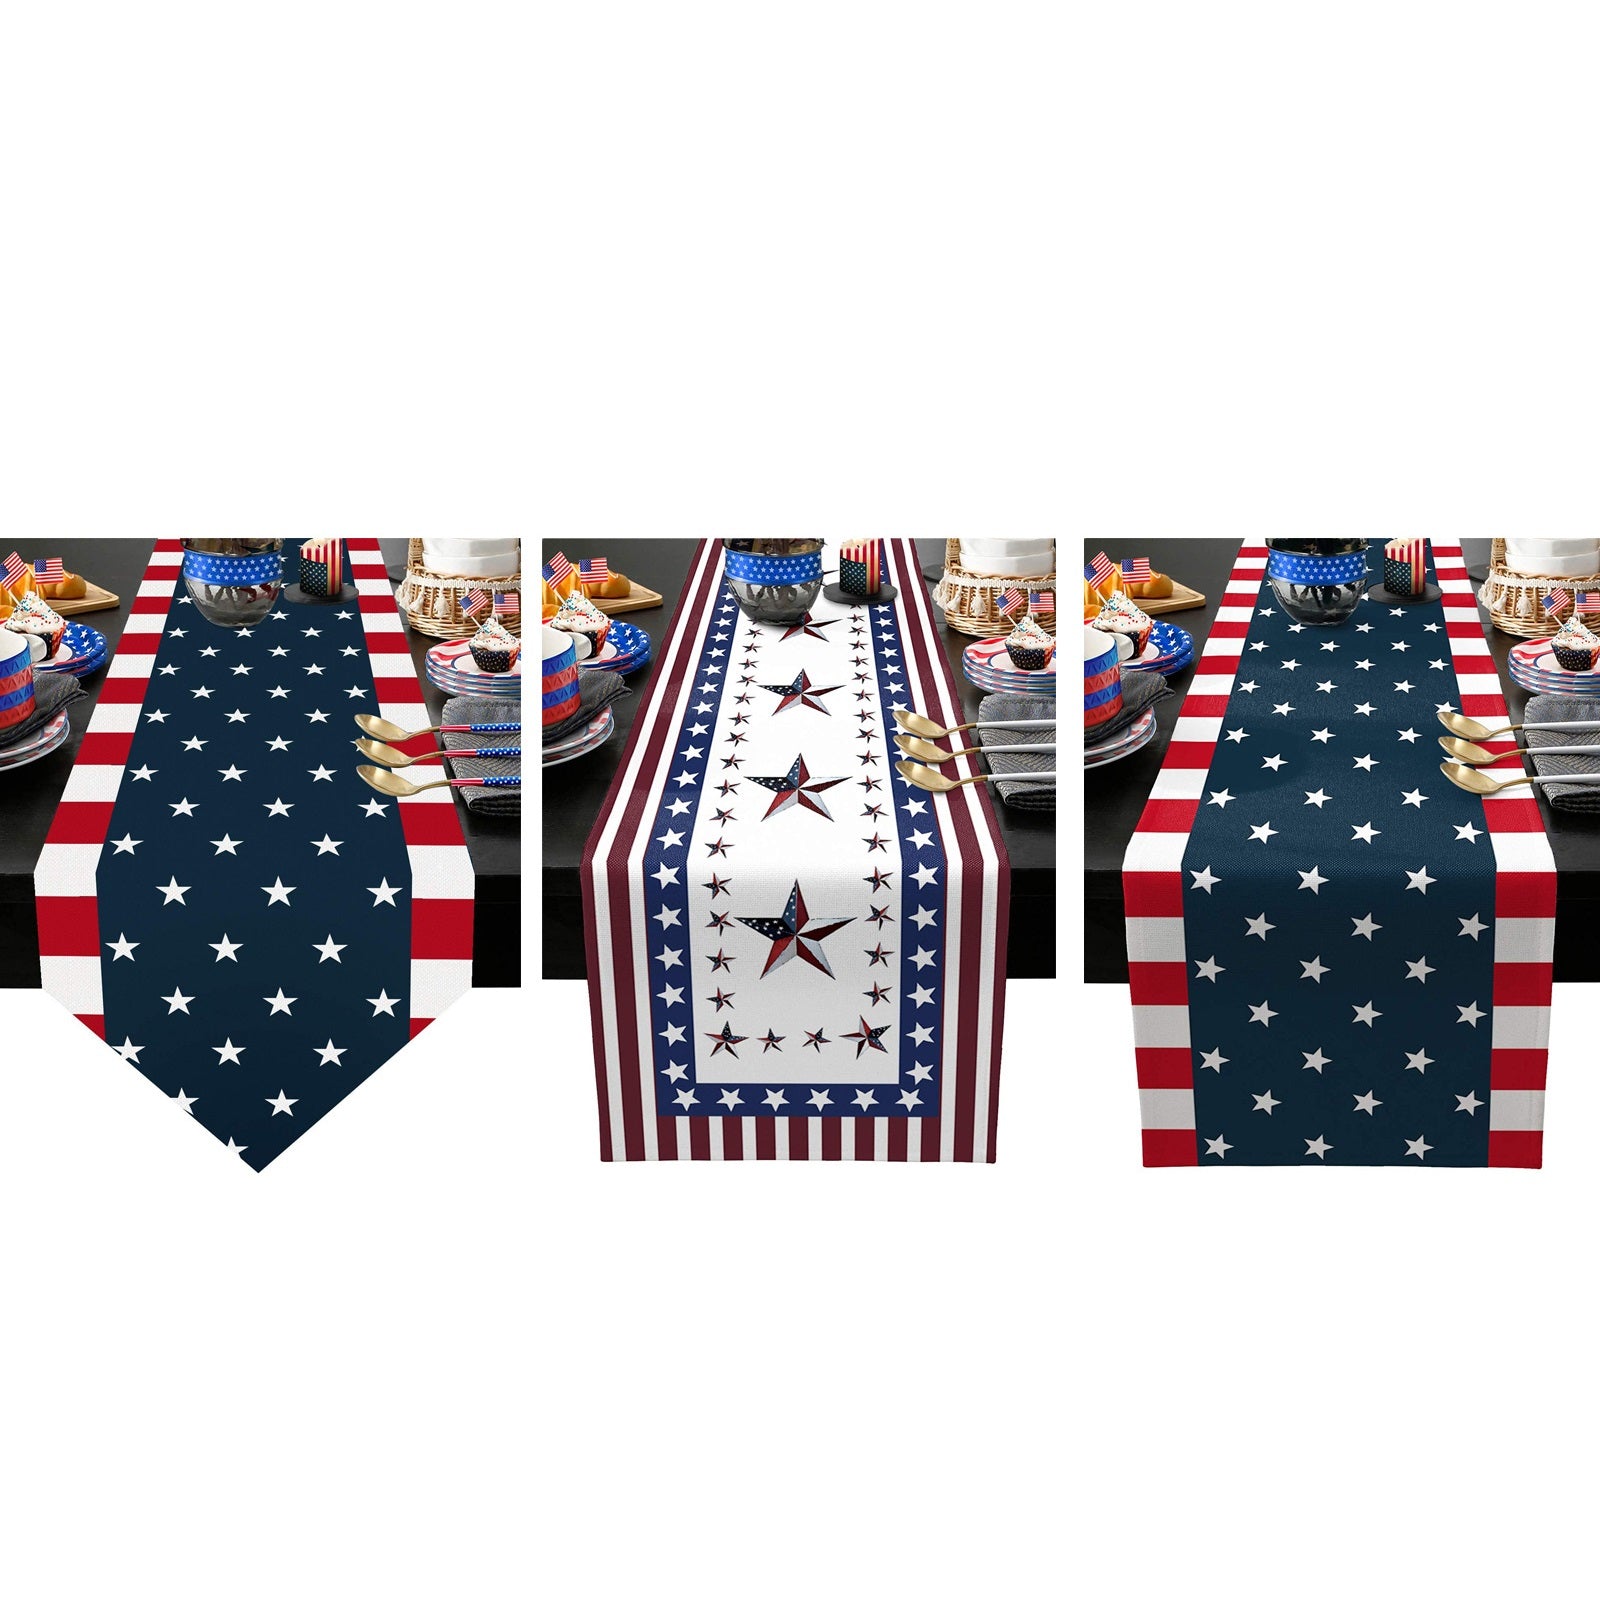 Bulk 2 Pcs Patriotic Independence Day Table Runners for Party Dining Kitchen Home Decor Wholesale